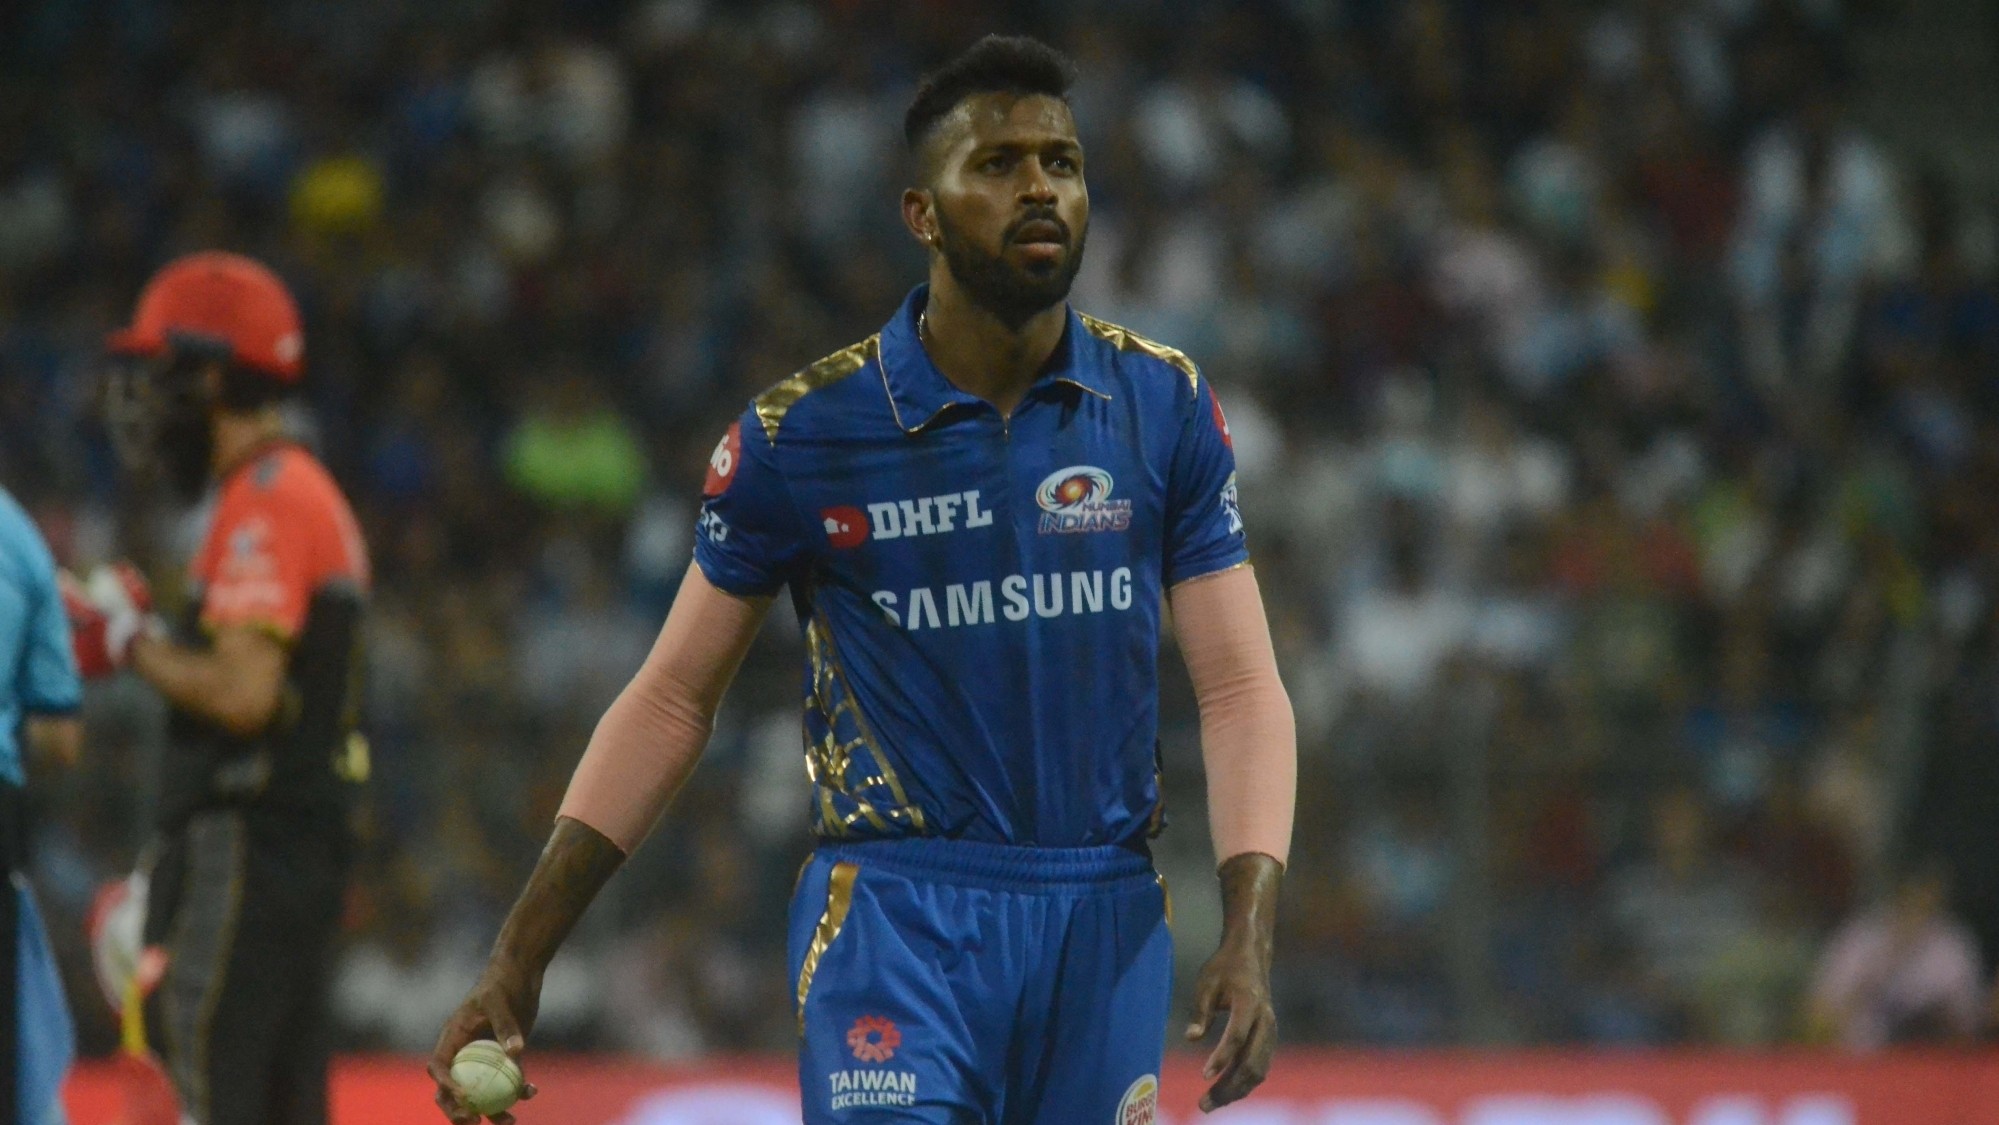 IPL 2020: Hardik Pandya's workload, India commitments reason why he hasn't been bowled by MI - Report